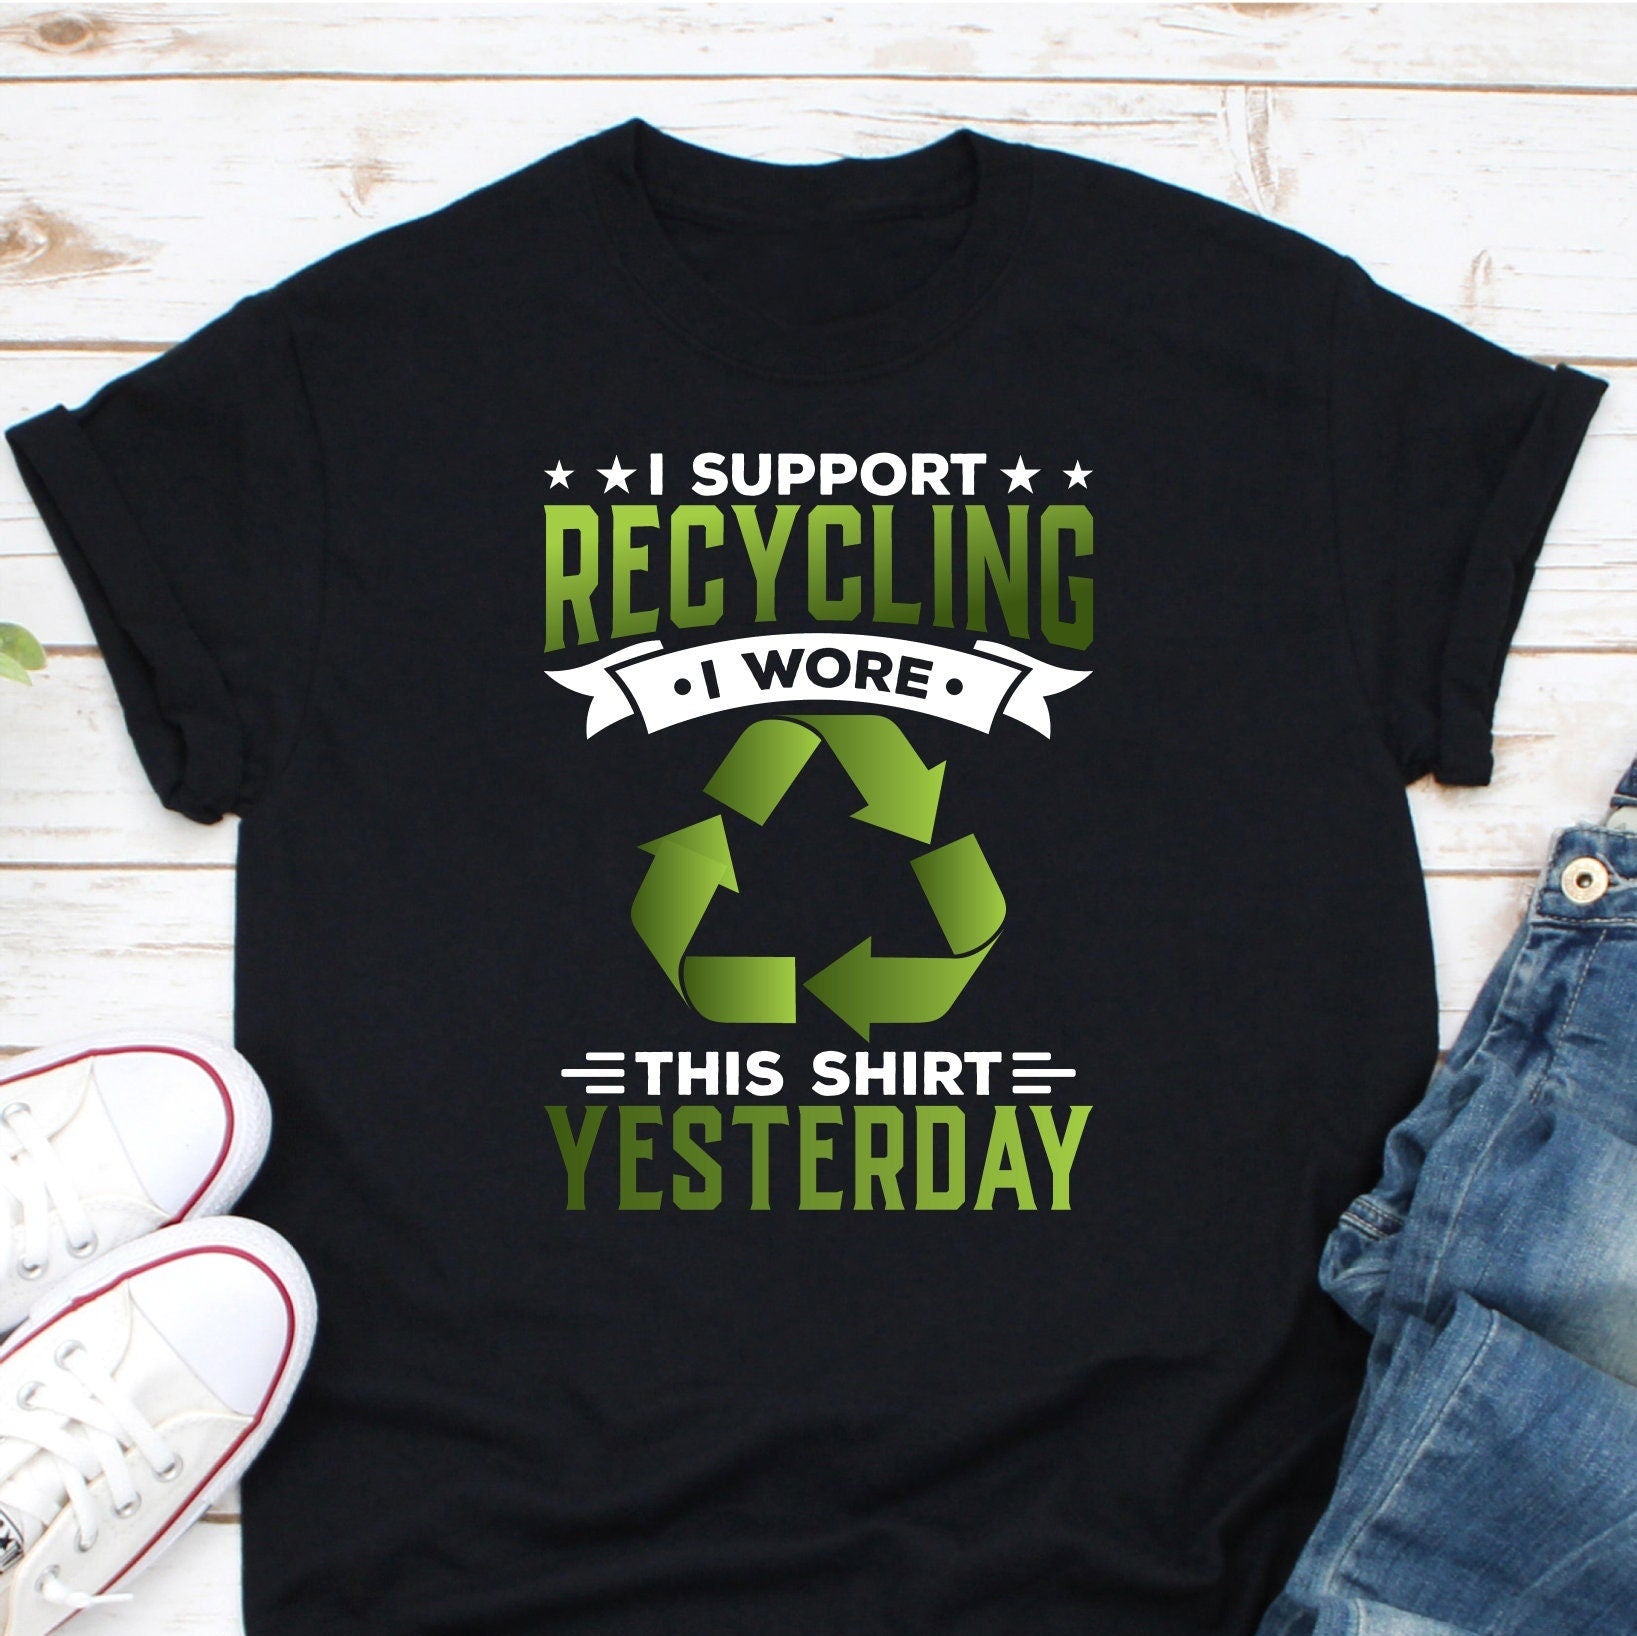 I Support Recycling I Wore This Shirt Yesterday Shirt, Recycling Garbage Shirt, Environmentalist Shirt